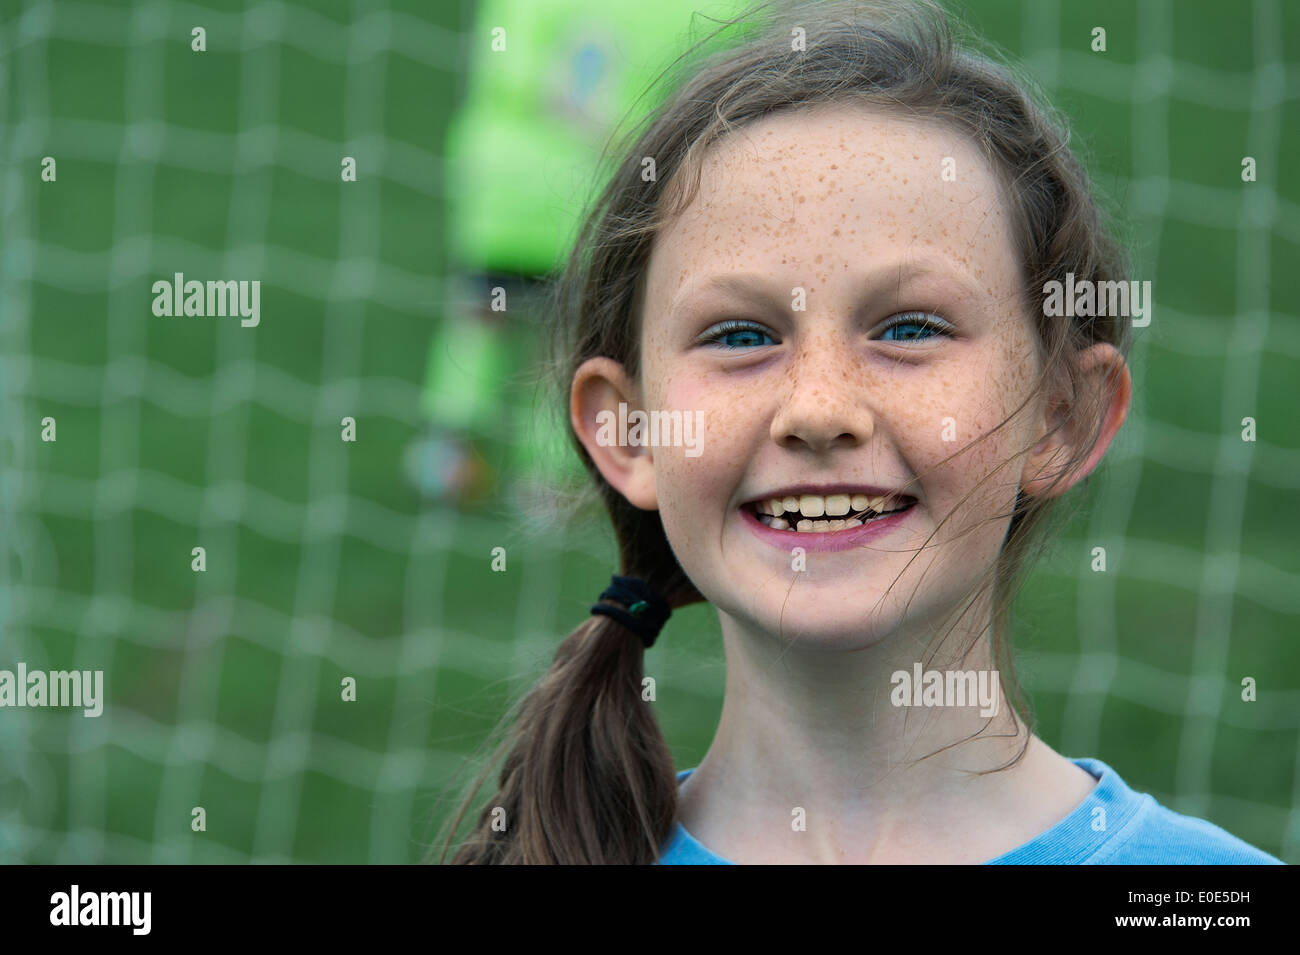 Girl at a youth soccer game. Stock Photo